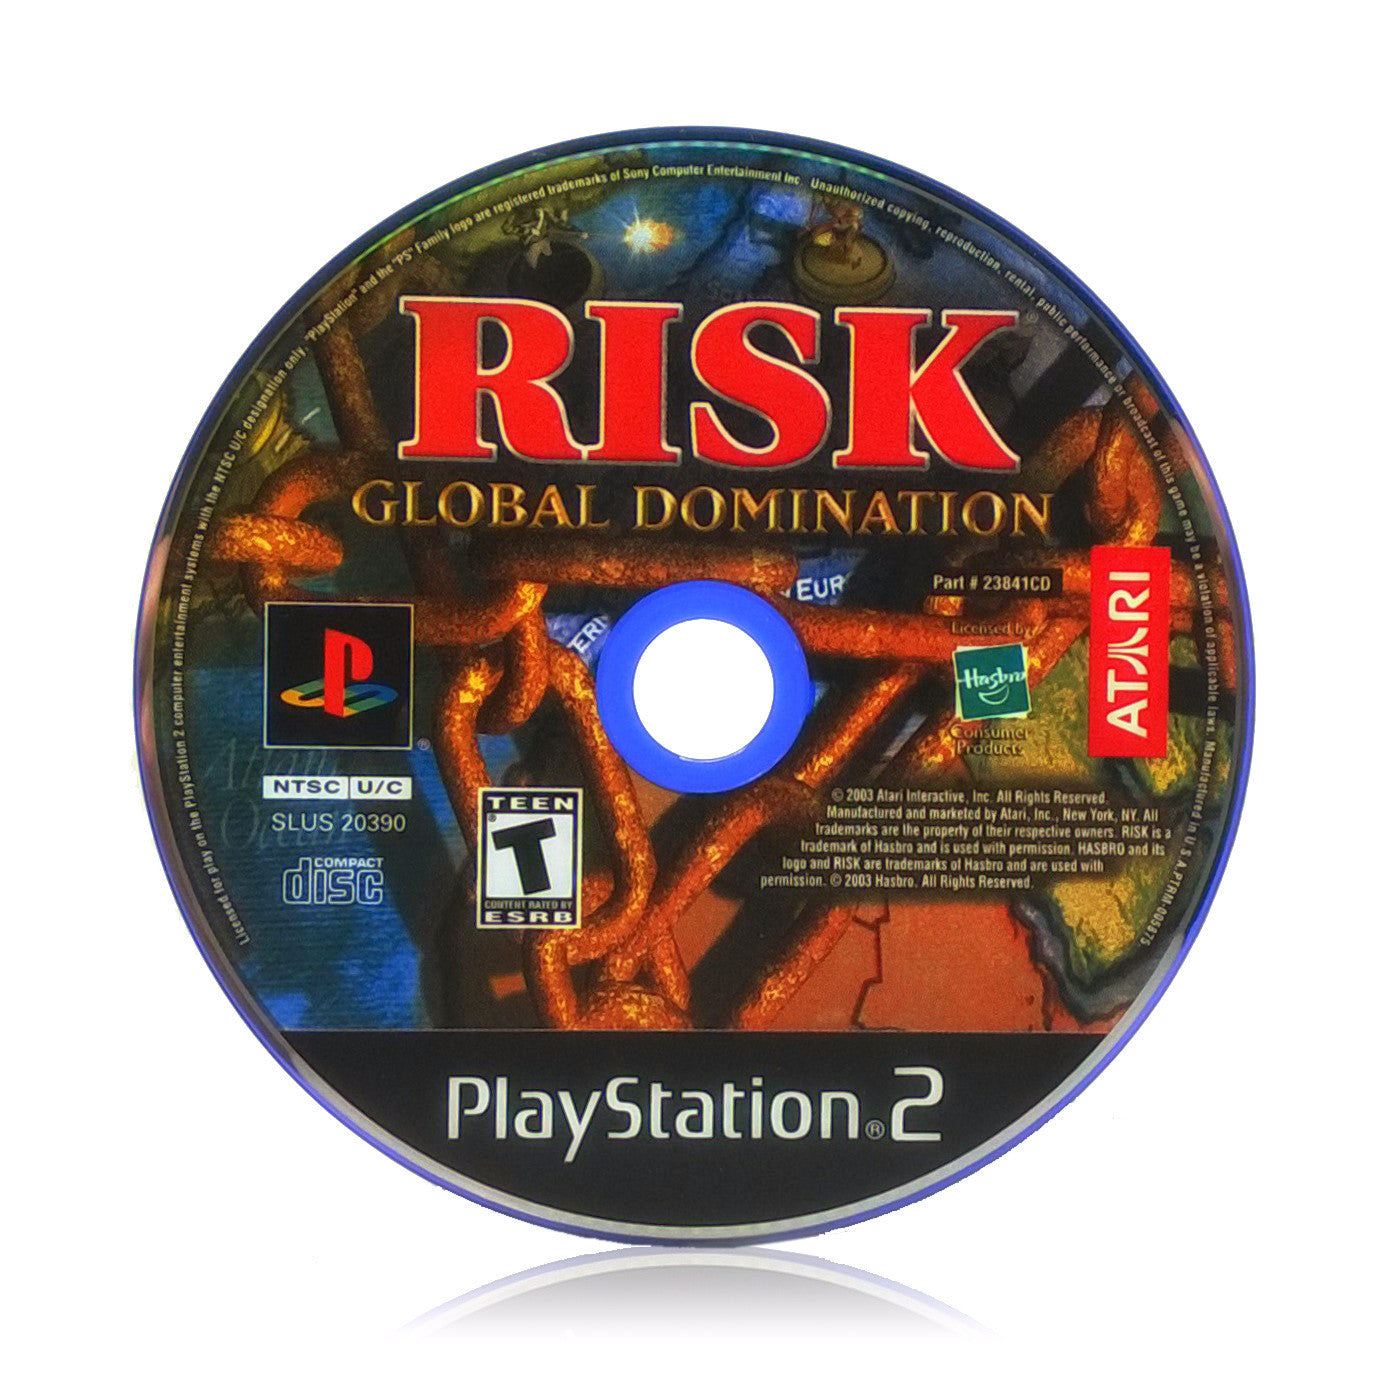 RISK: Global Domination Sony PlayStation 2 Game - Disc